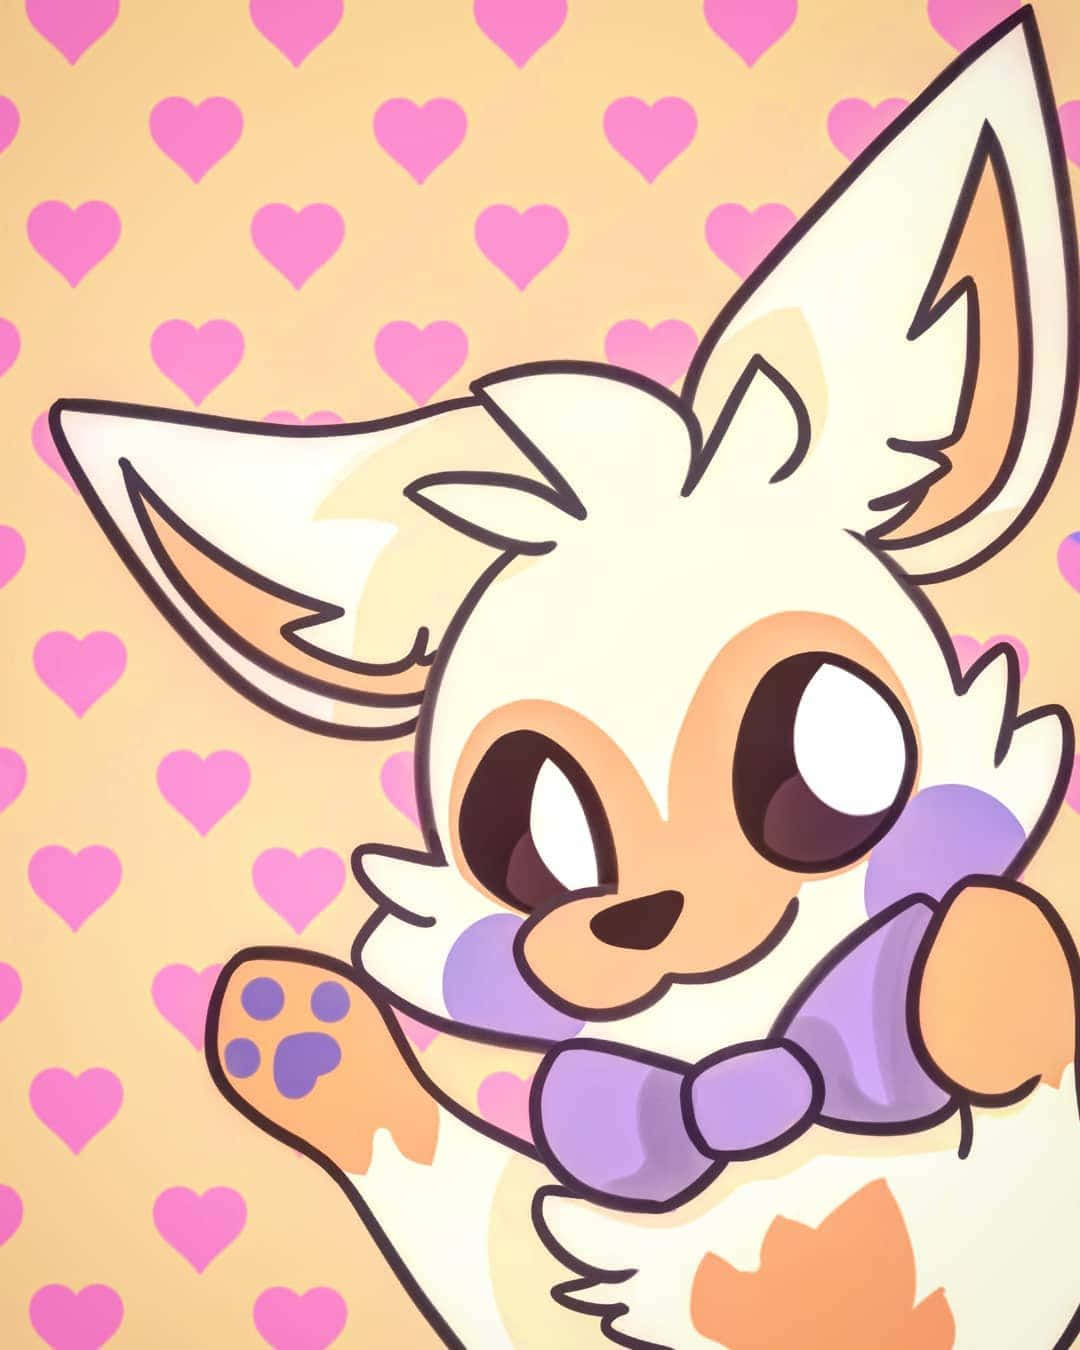 A Cute Fox With A Bow In Front Of Hearts Wallpaper